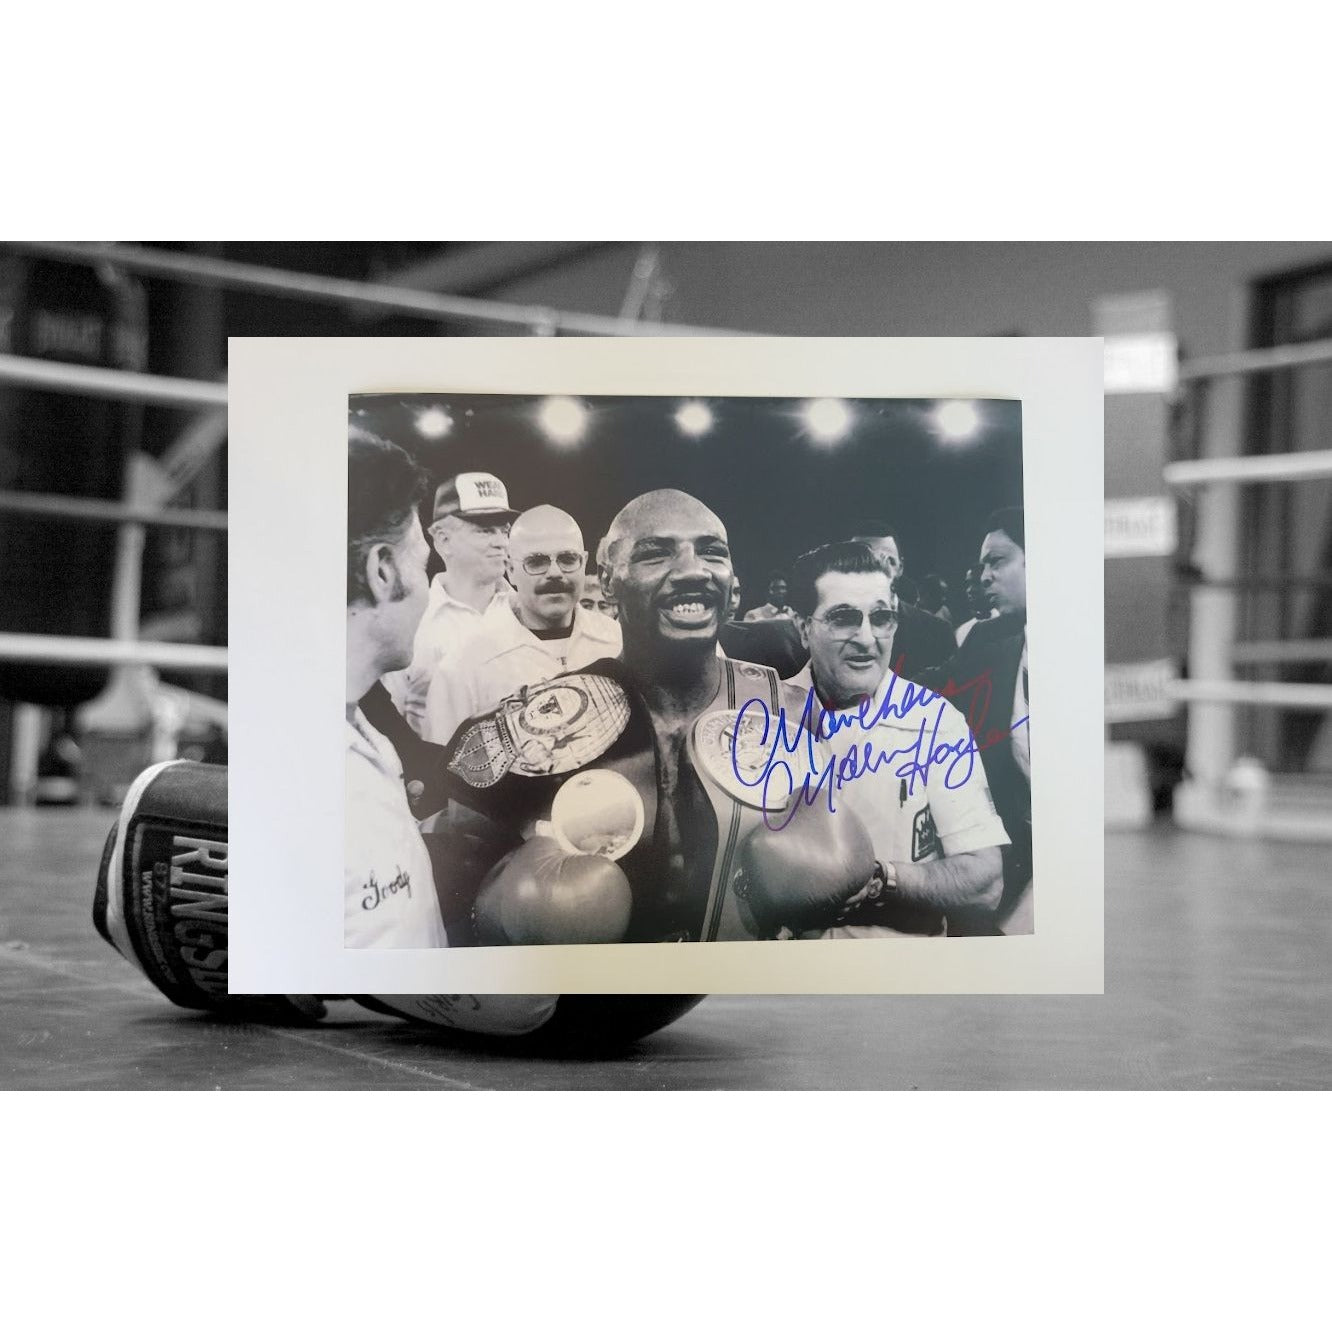 Marvelous Marvin Hagler 8 x 10 photo signed with proof